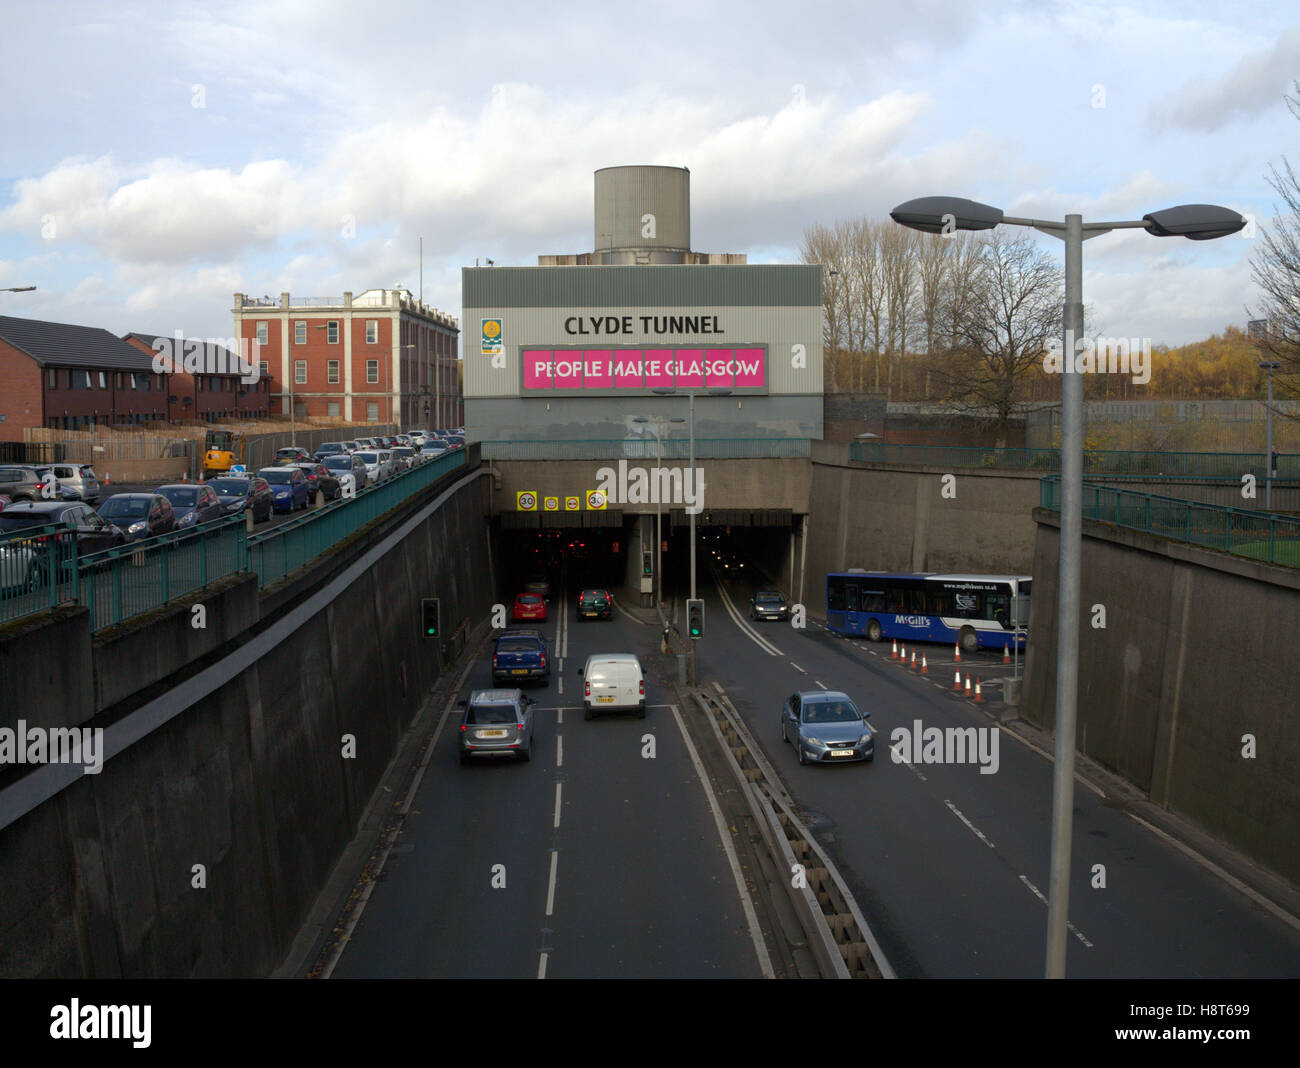 Clyde tunnel south entrance southern exit  people make glasgow sign cars traffic Stock Photo